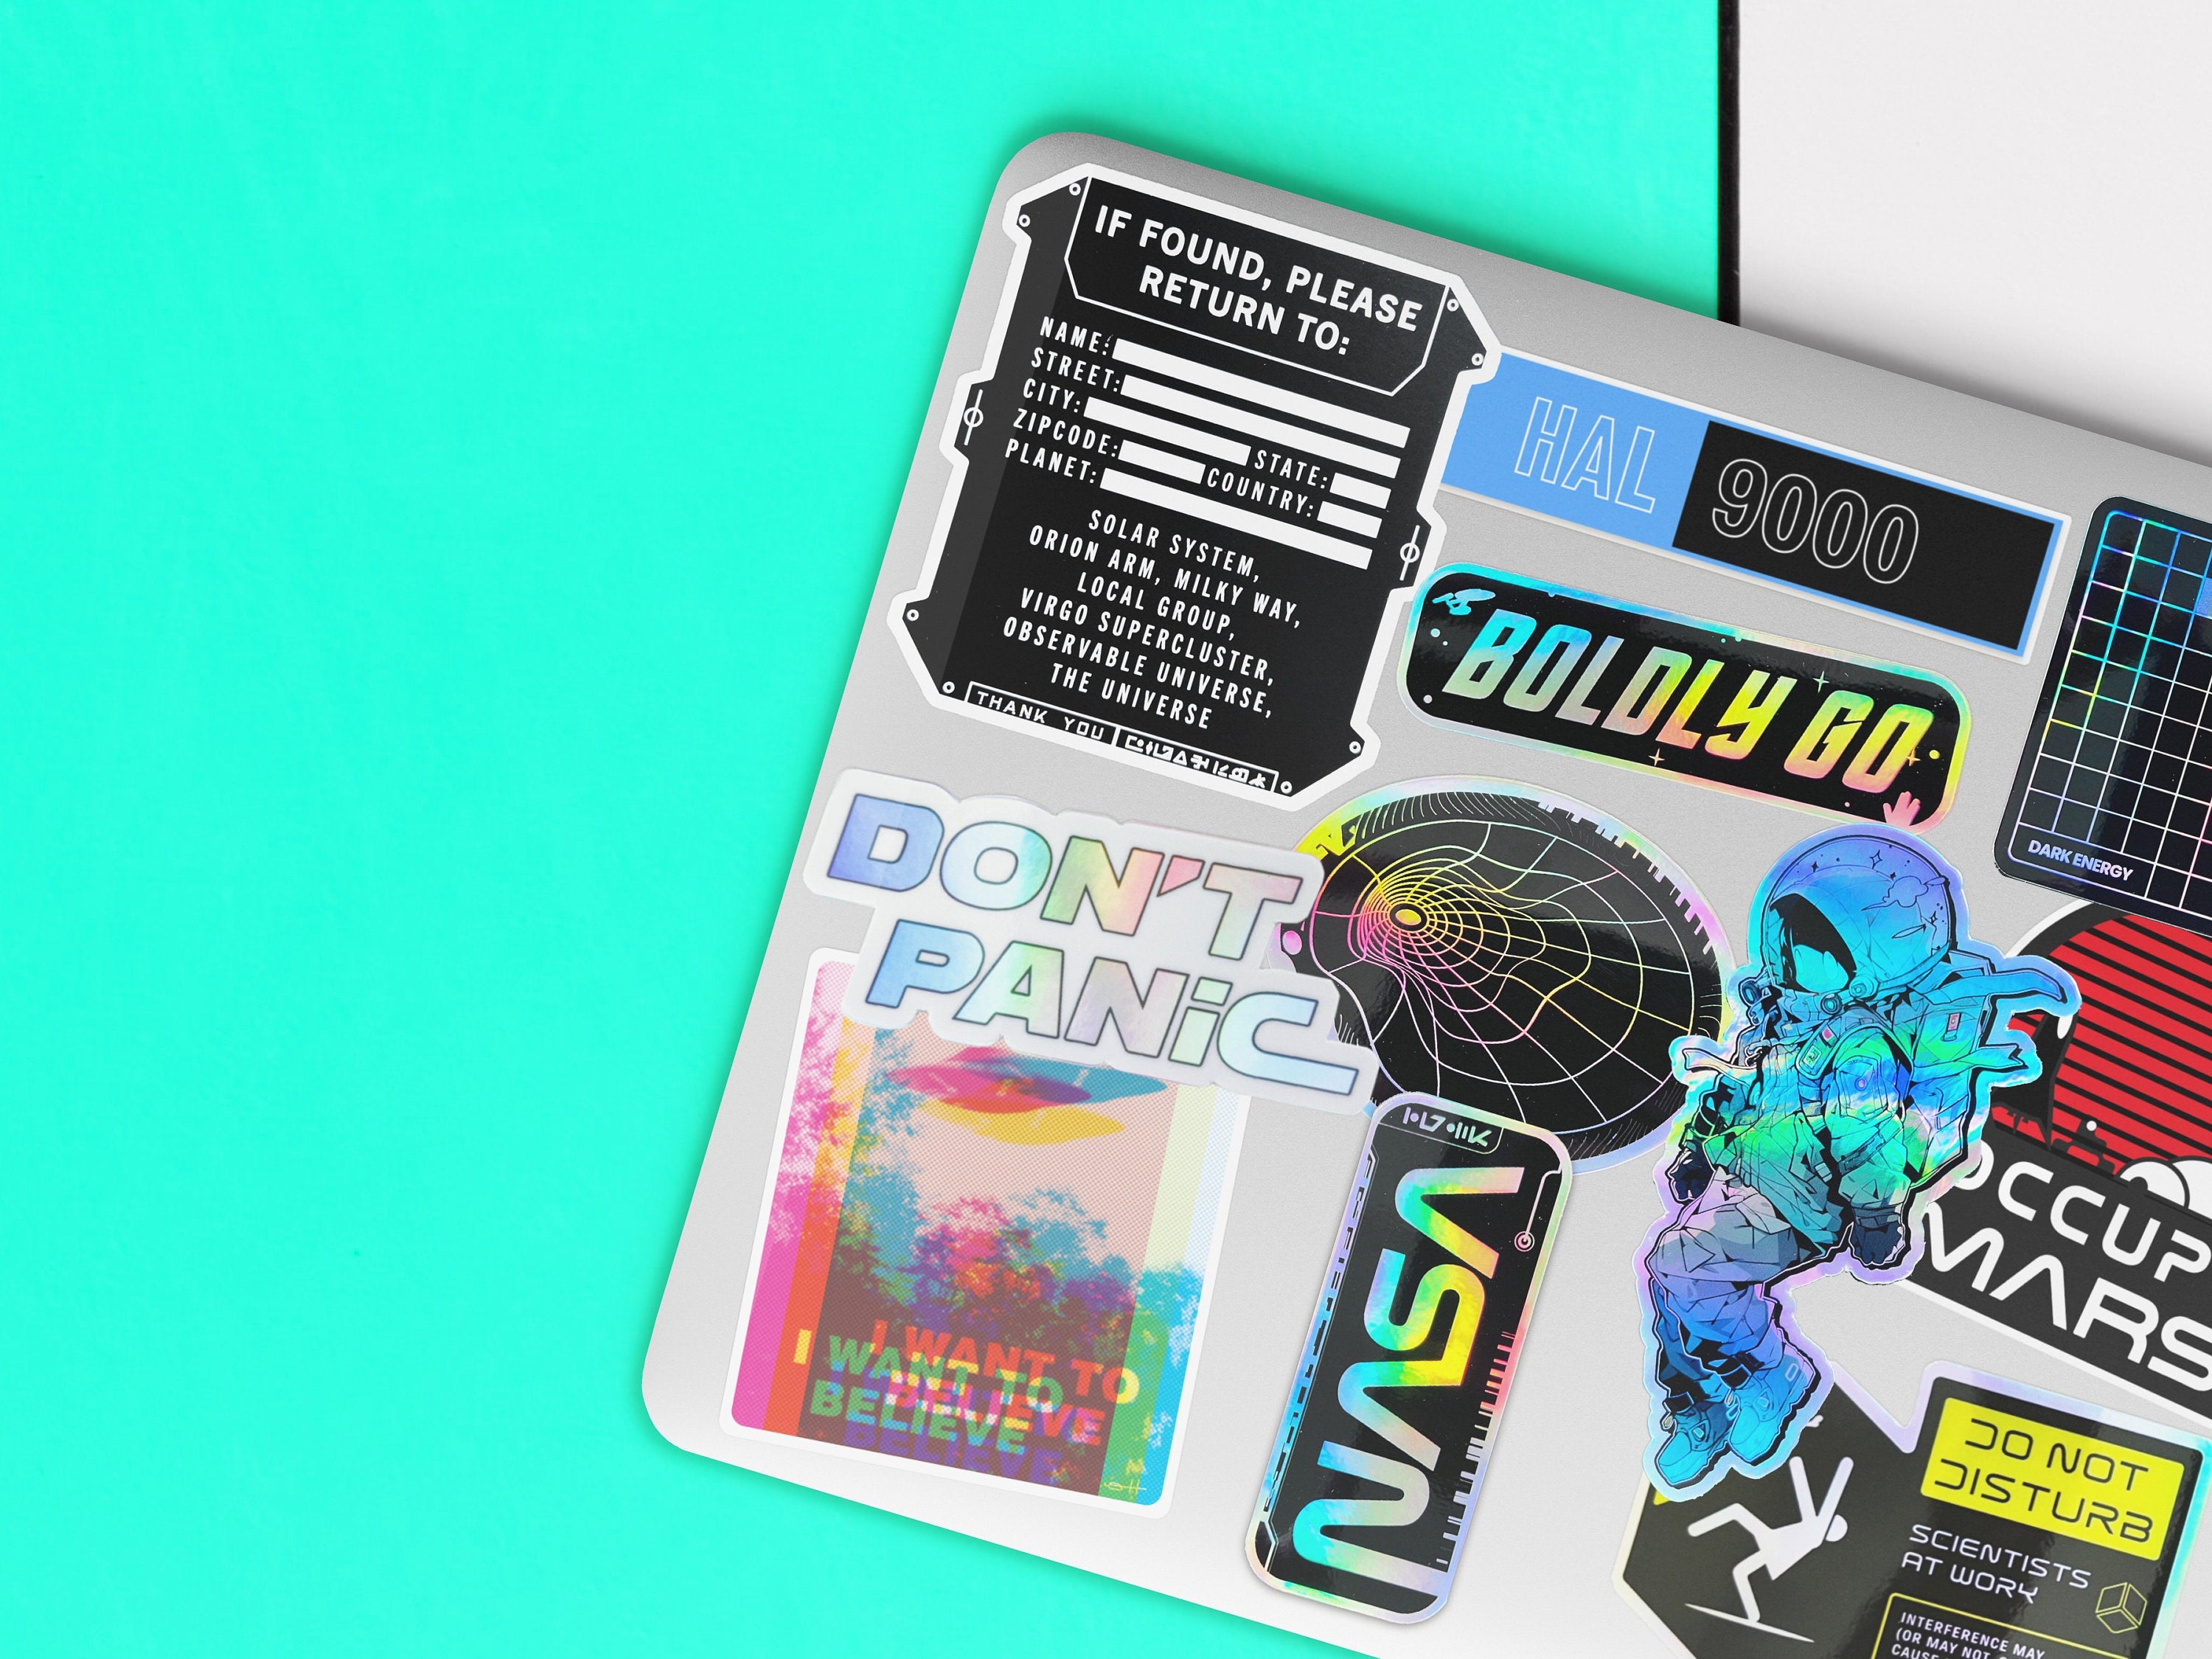 Holographic Don't Panic Decal - Futuristic HHGTTG Laptop Vinyl Sticker - Hitchhiker's Guide Lovers Sci-Fi Gift